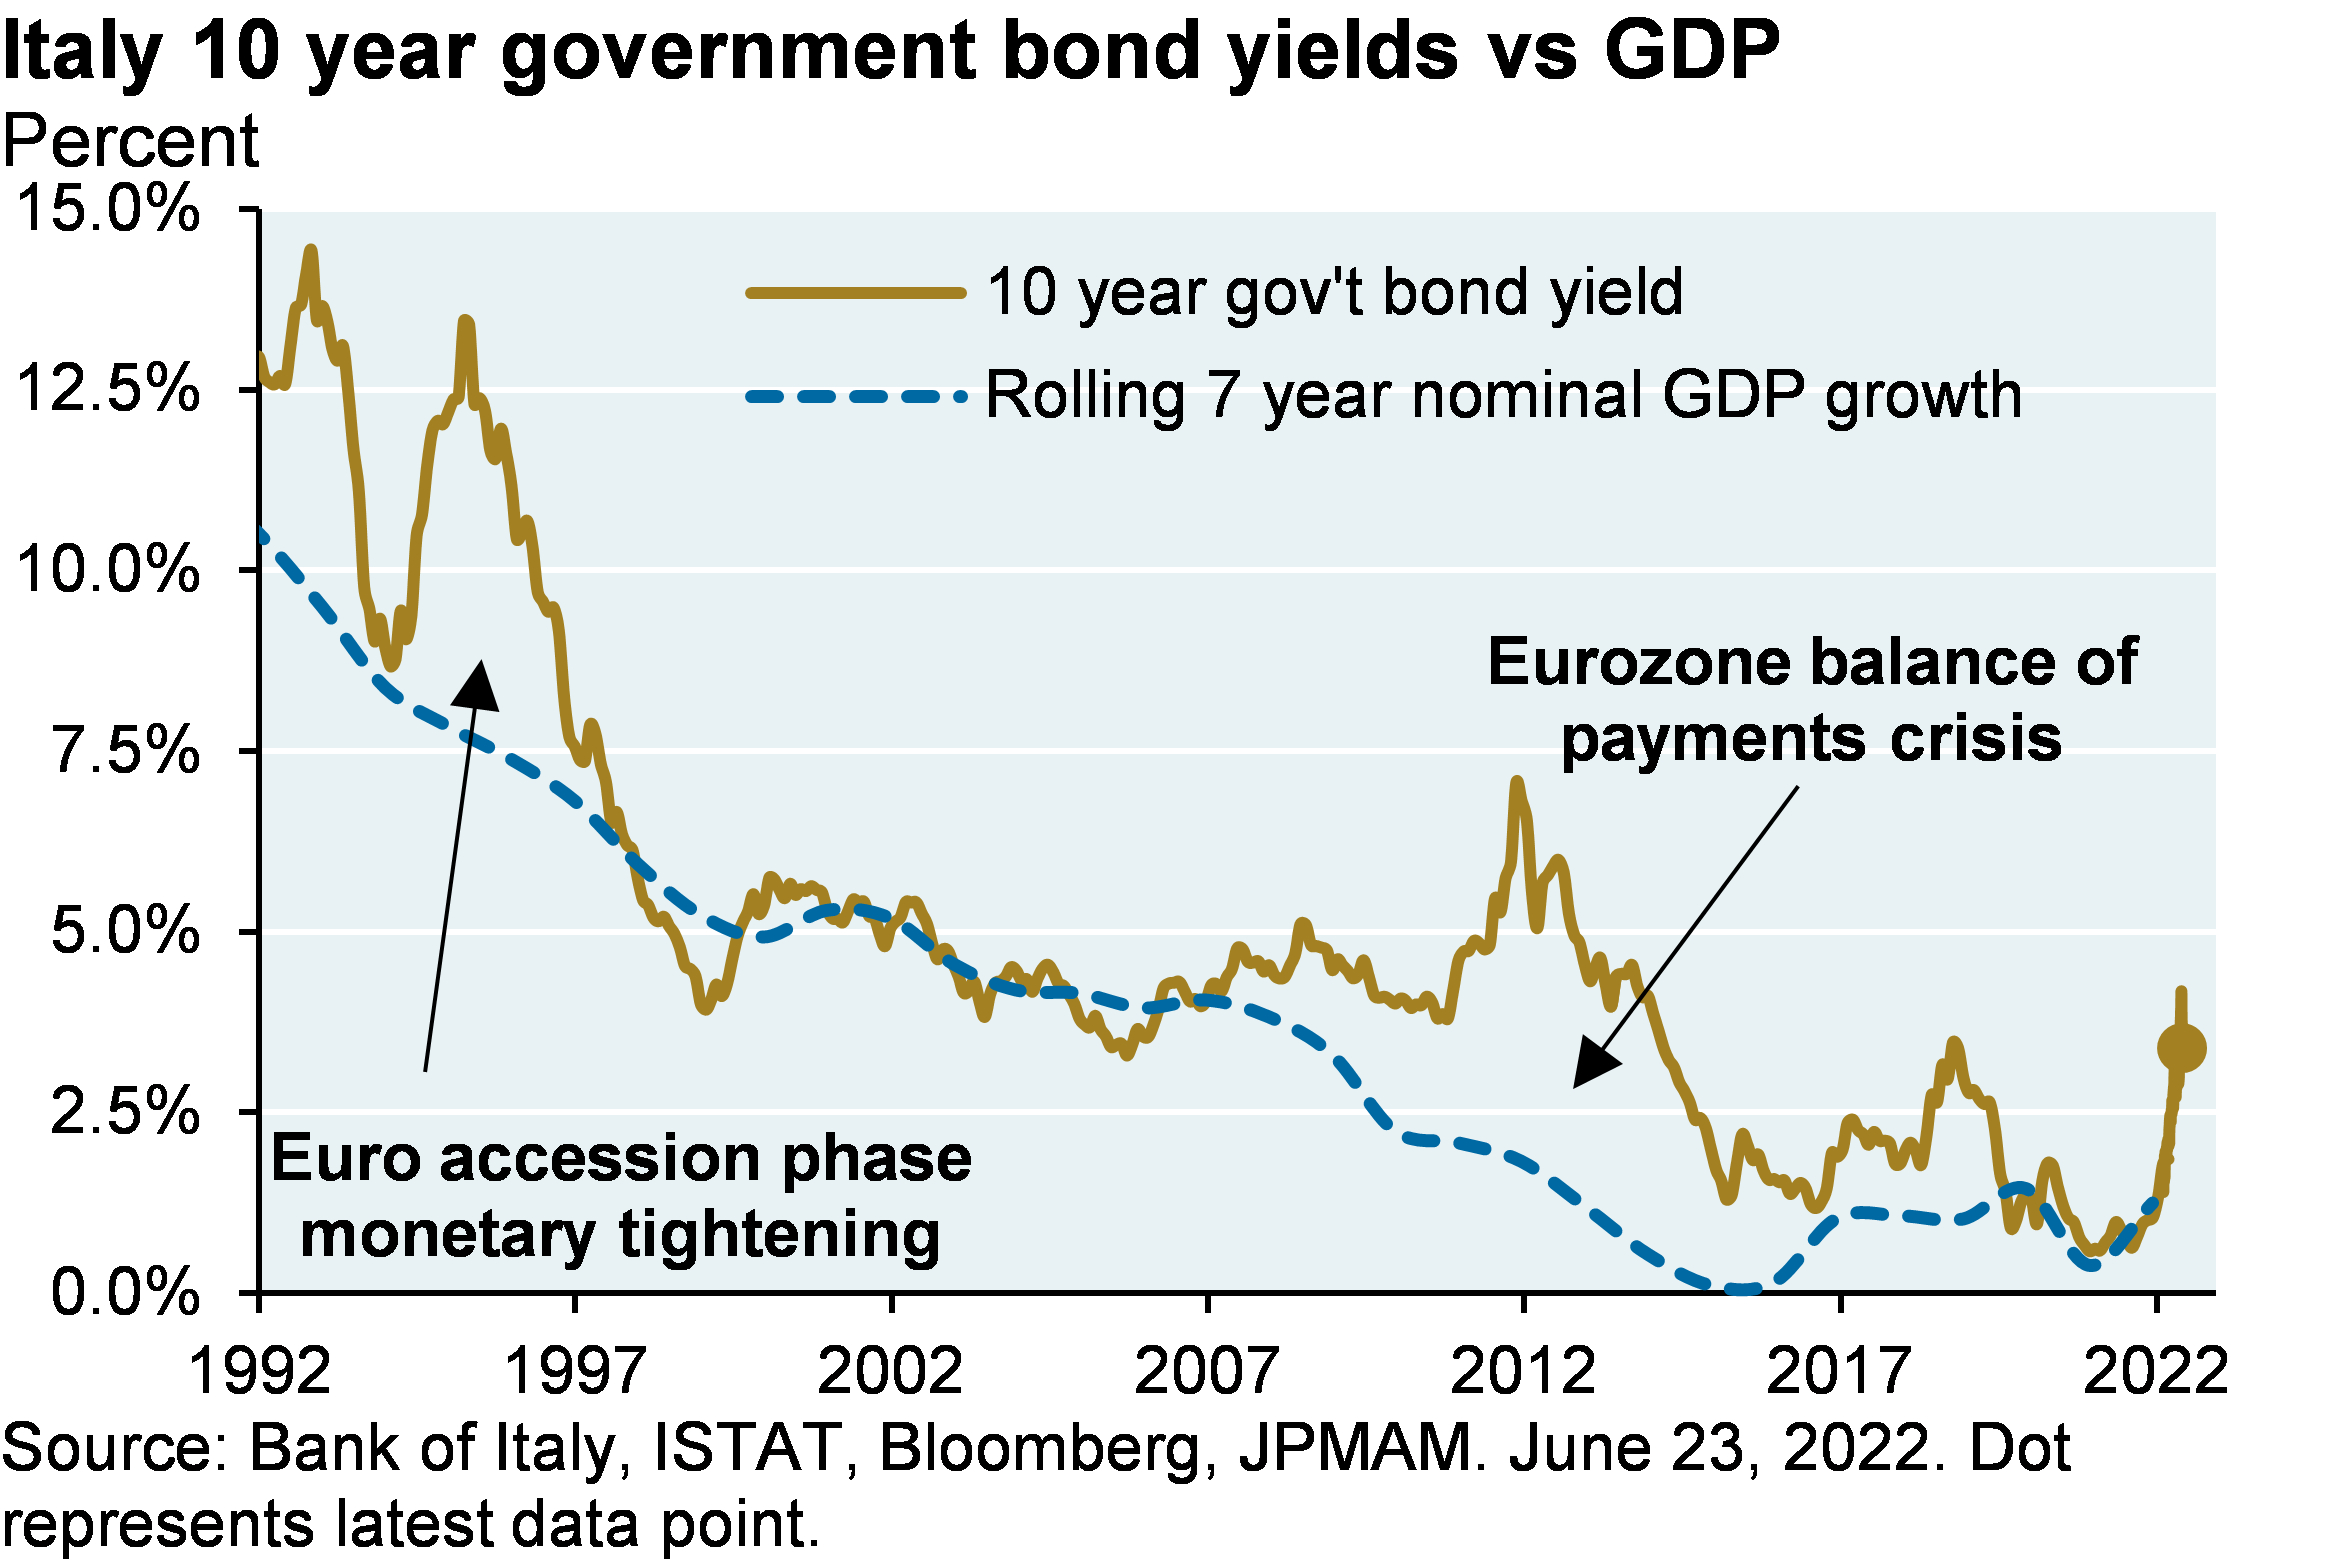 Italy 10 year government bond yields vs GDP